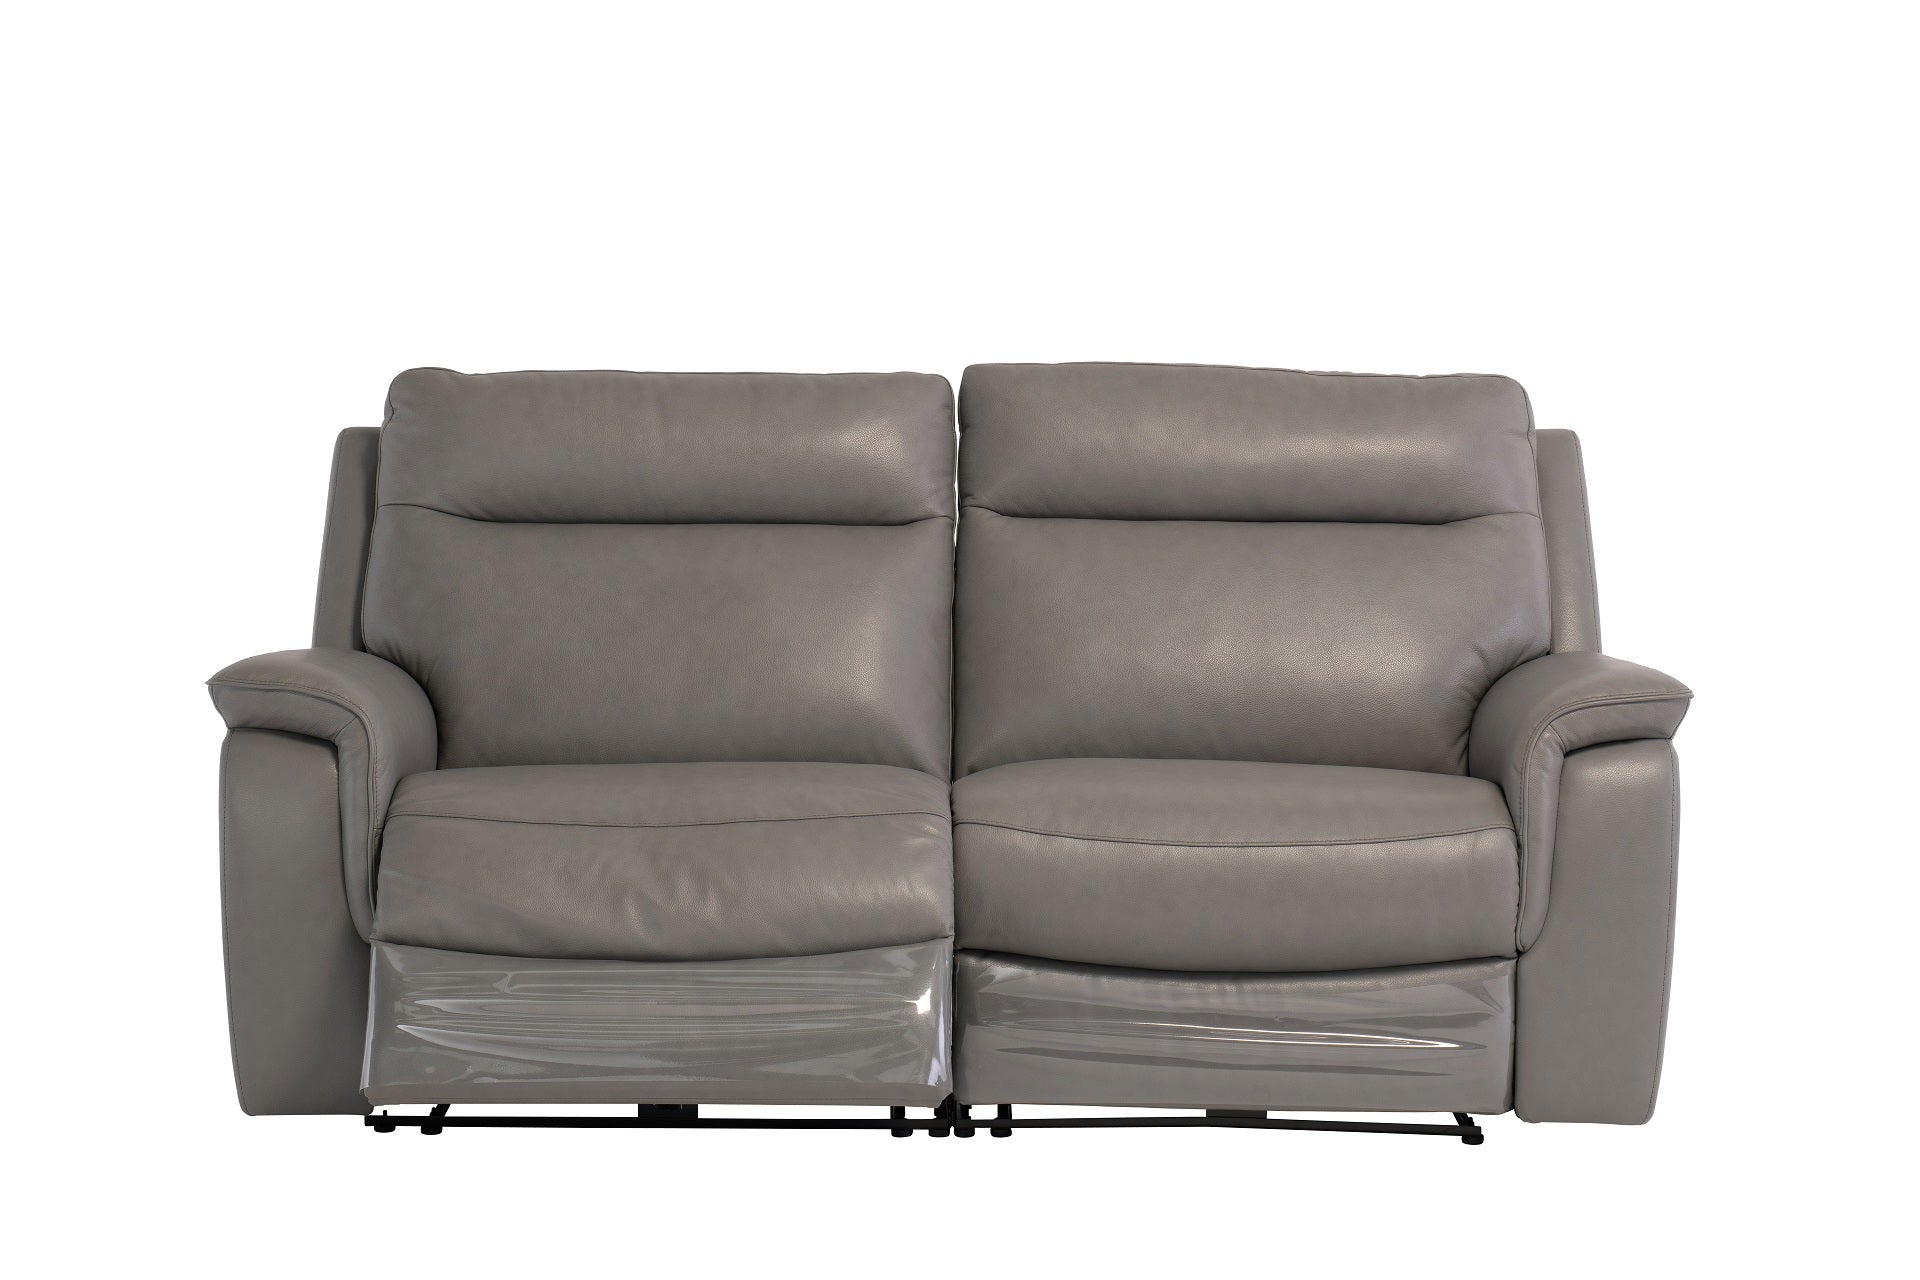 Hanna Leather Electric 2 Seater Recliner - Grey